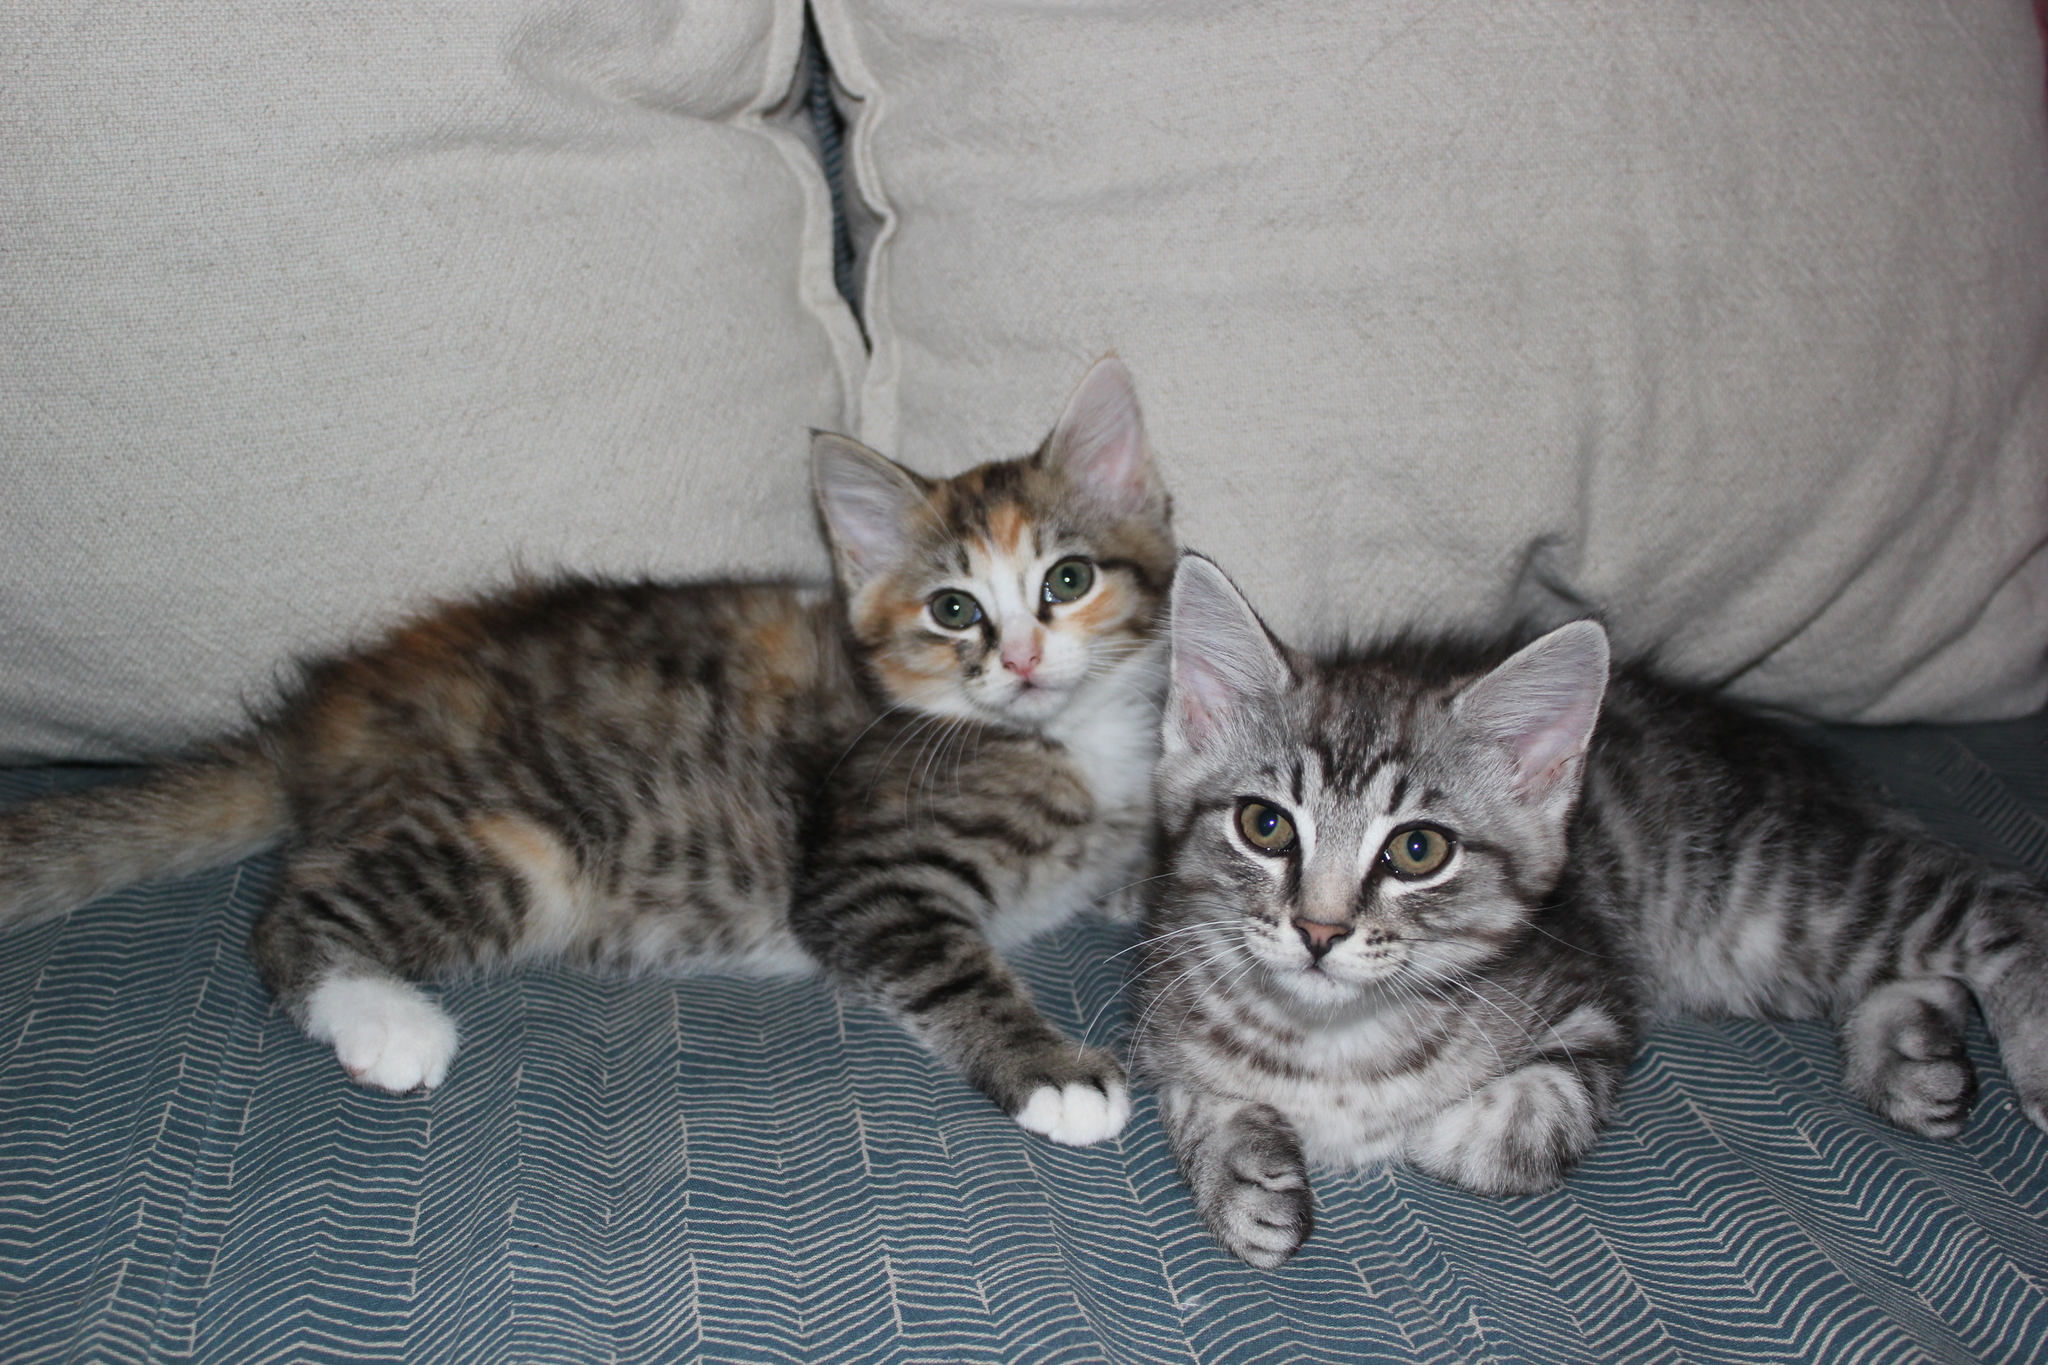 Kittens to a new home - My, Kittens, In good hands, Novosibirsk region, cat, Longpost, No rating